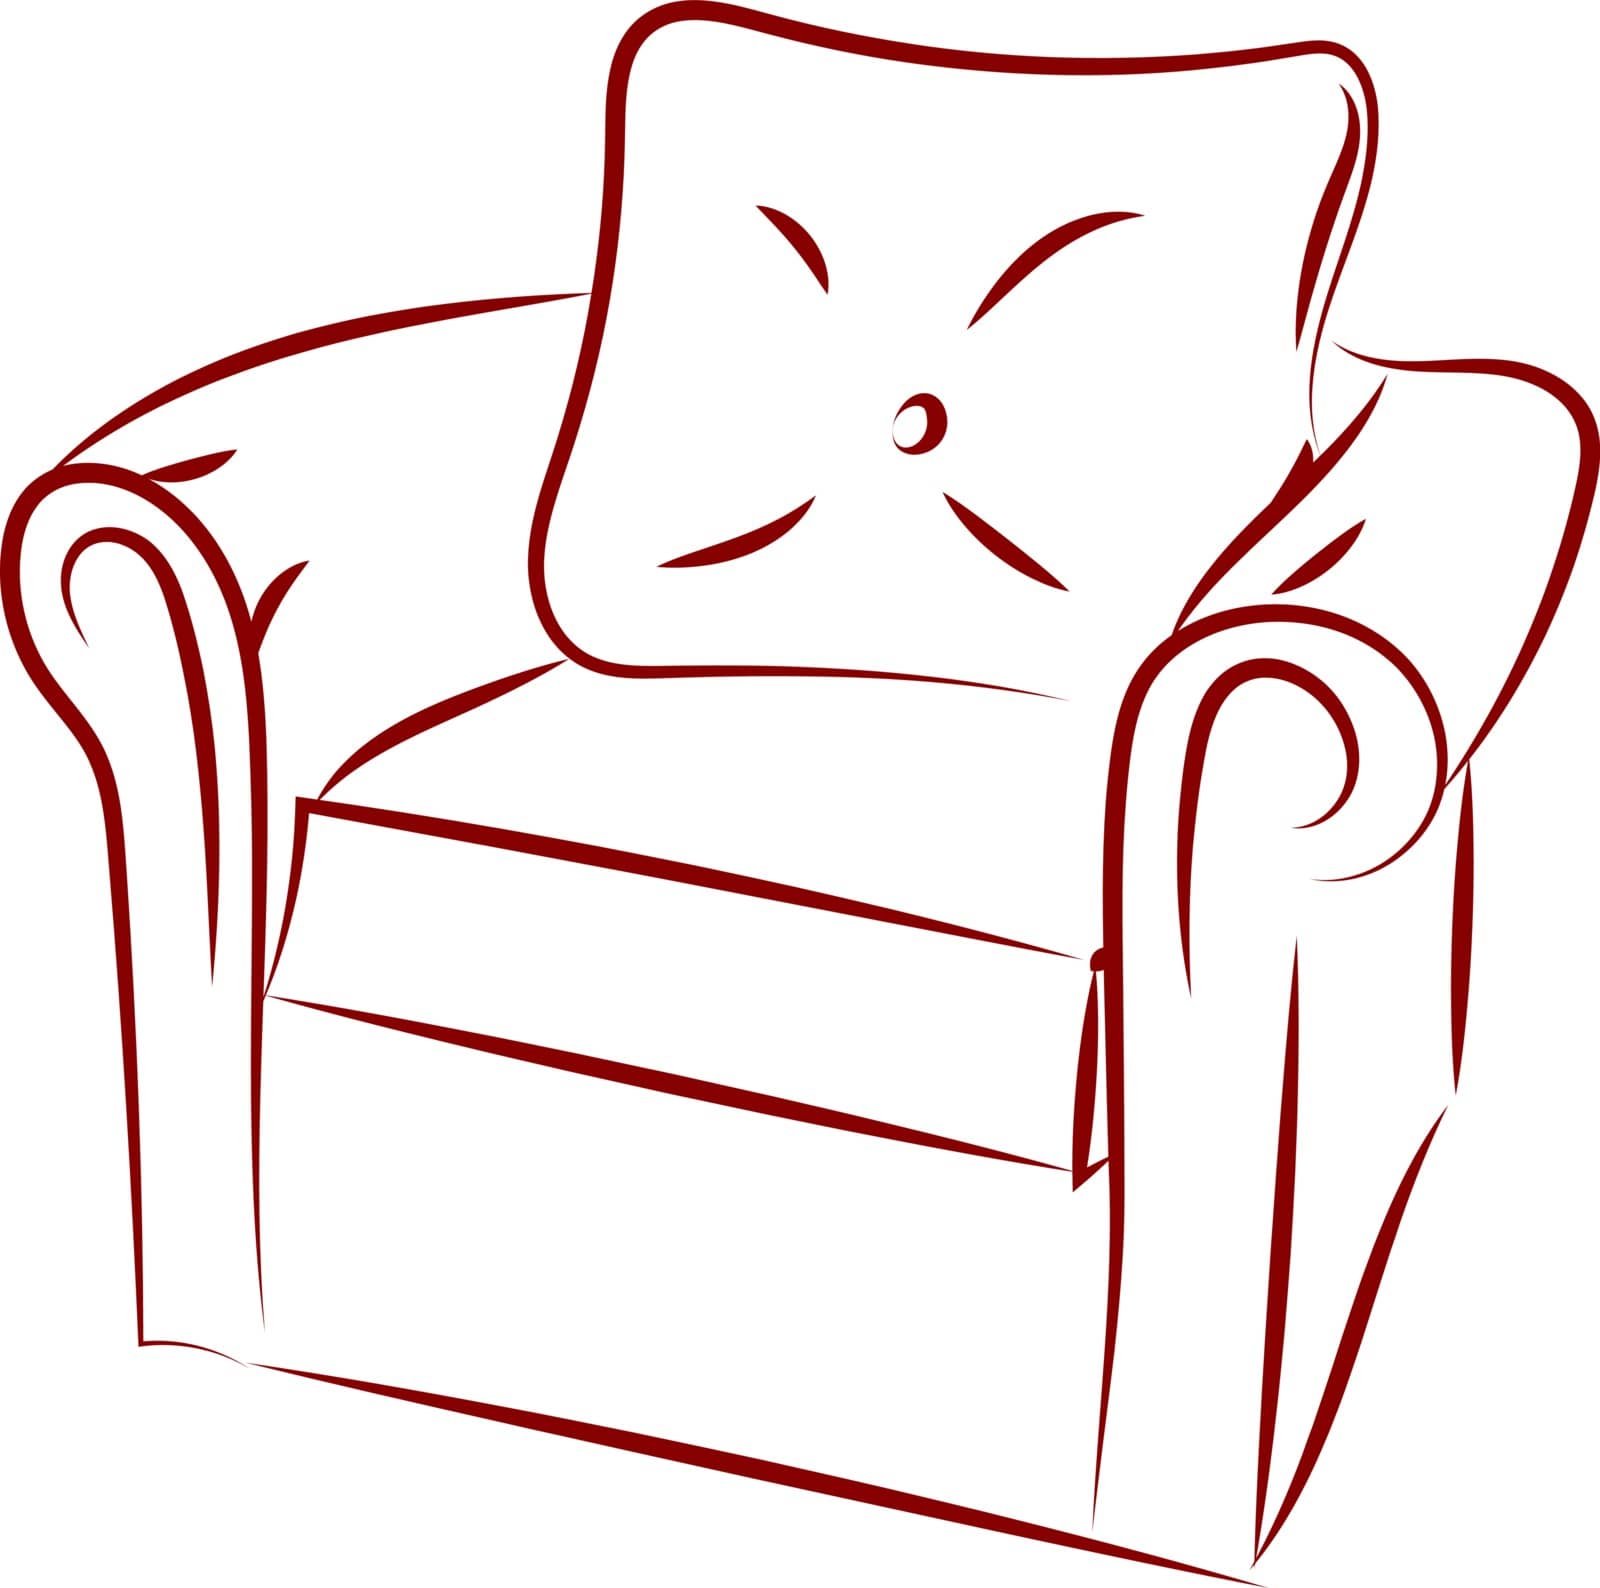 Armchair drawing, illustration, vector on white background.